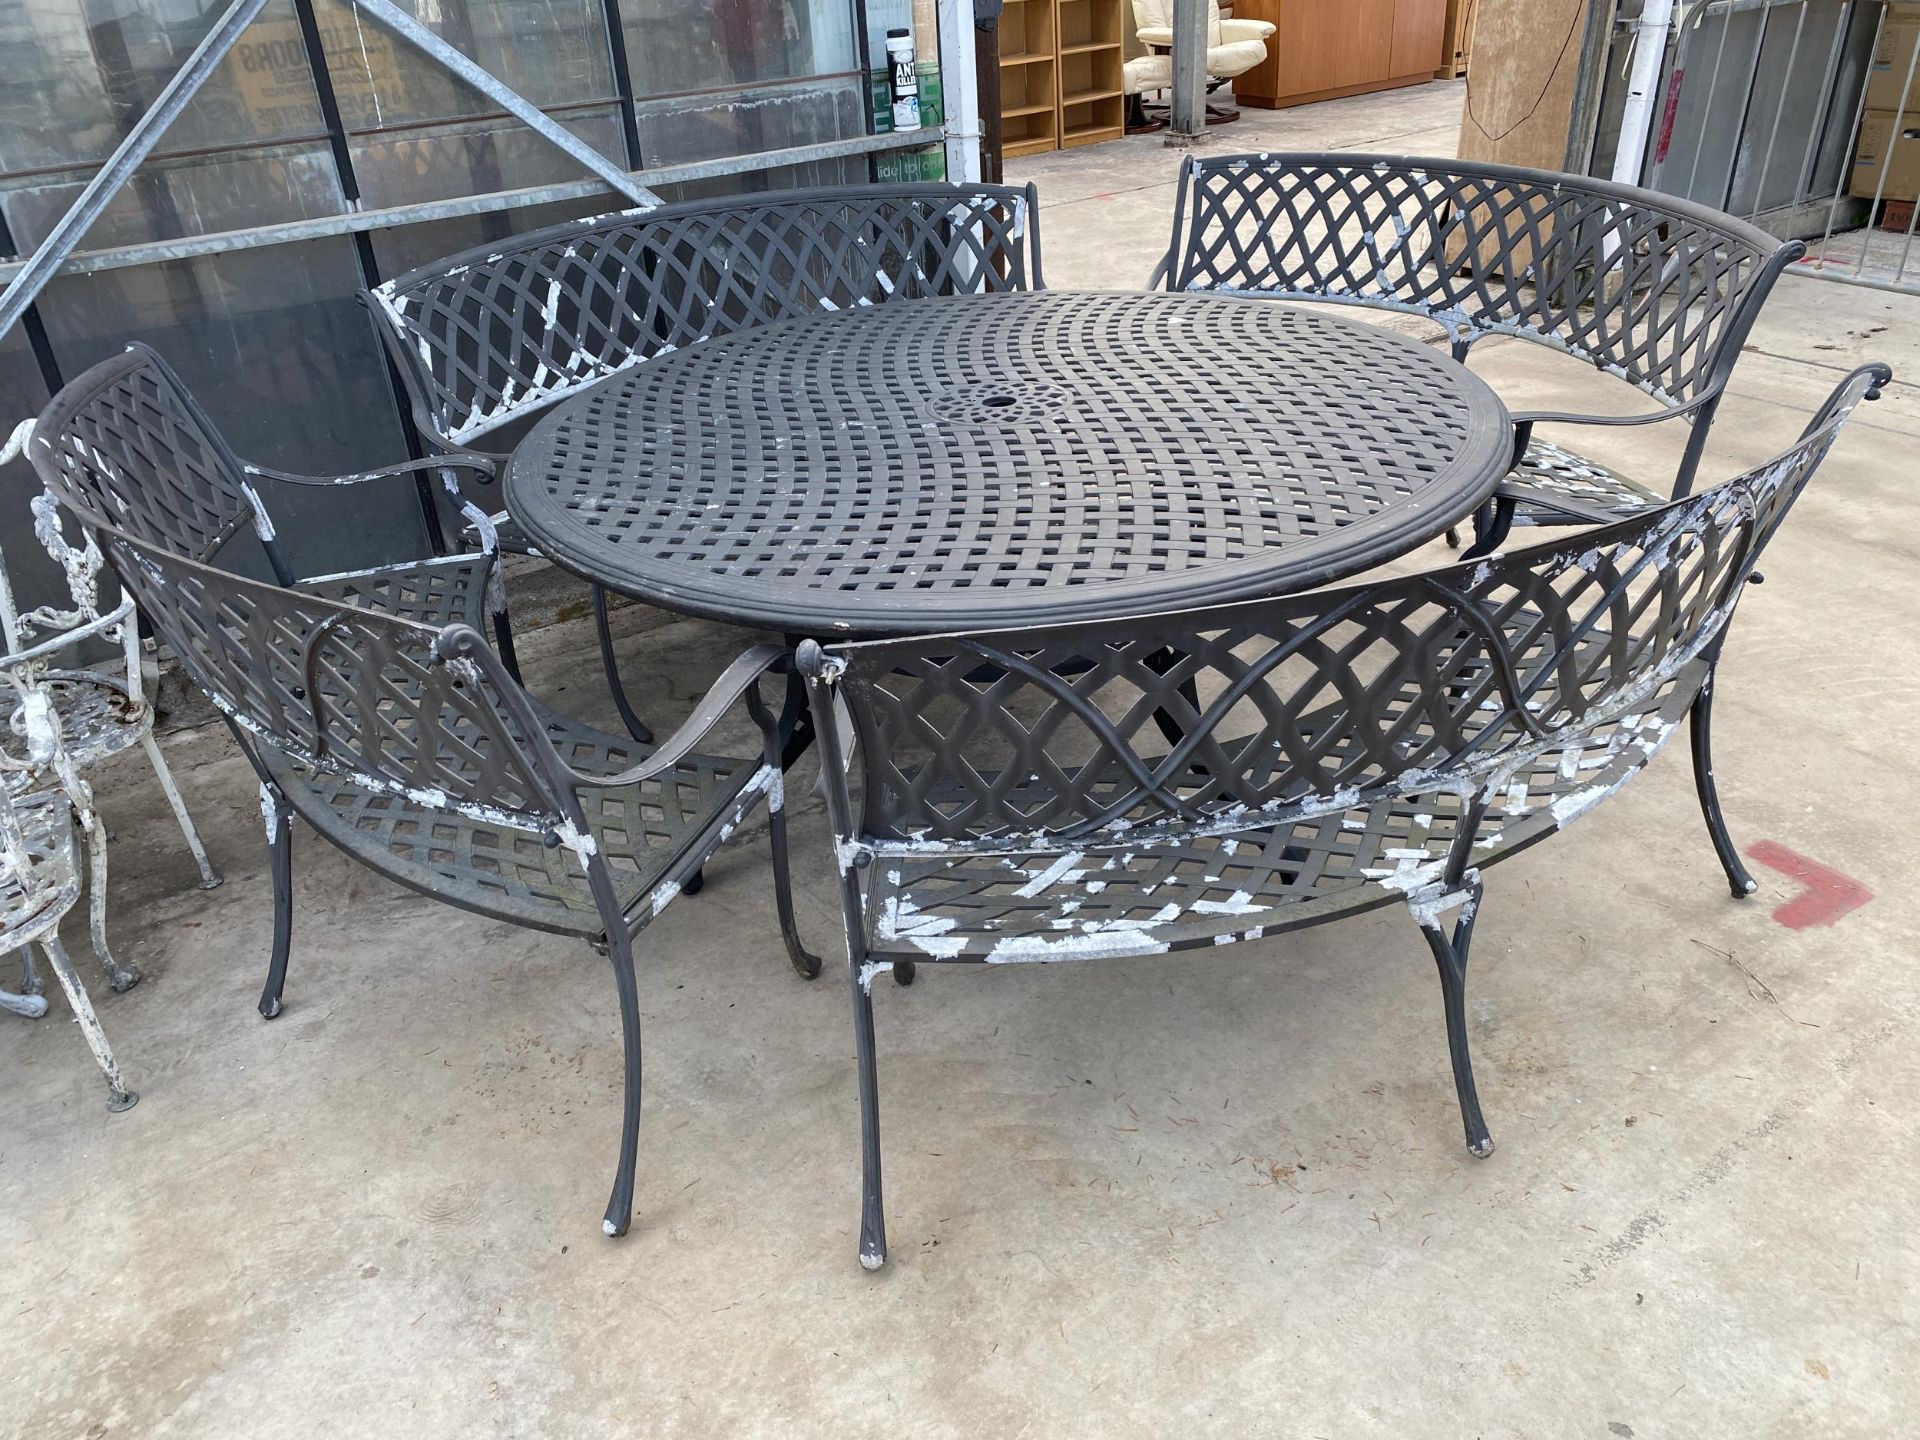 A LARGE CAST ALLOY PATIO FURNITURE SET COMPRISING OF A ROUND TABLE AND FOUR CURVED TWO SEATER